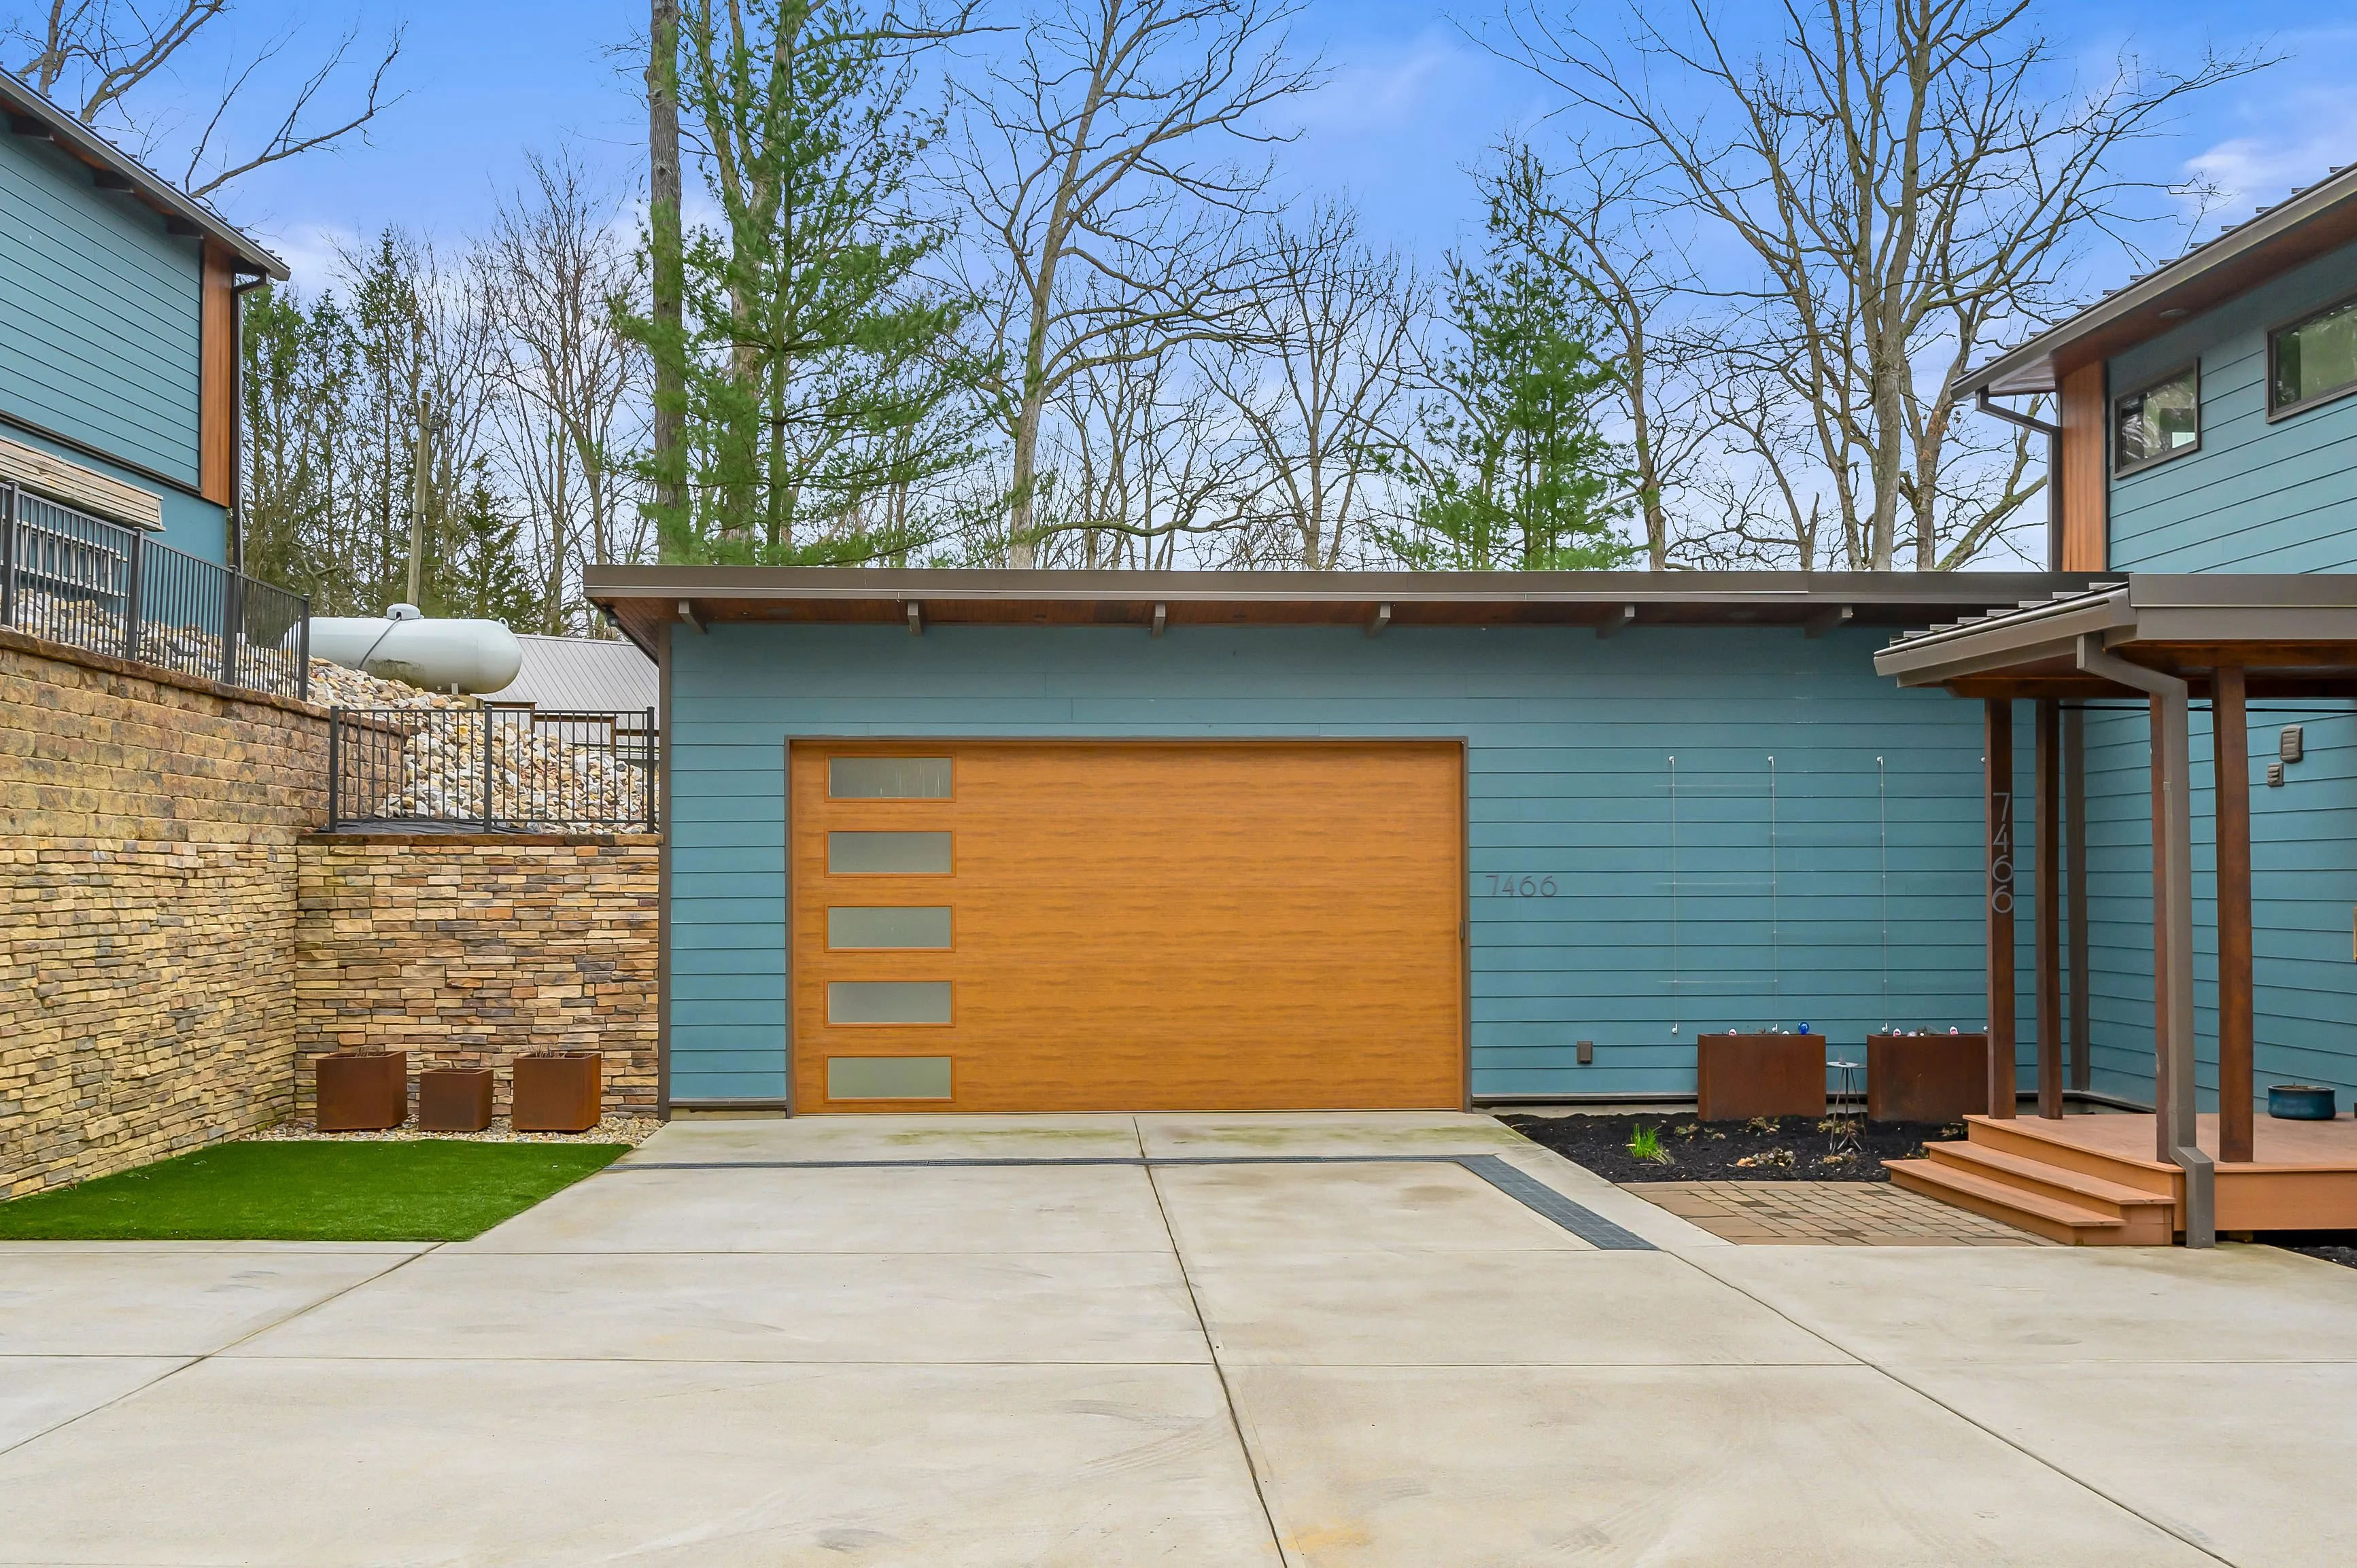 Exterior view of a modern home with a blue facade and wooden garage door, concrete driveway, and a landscaped yard.